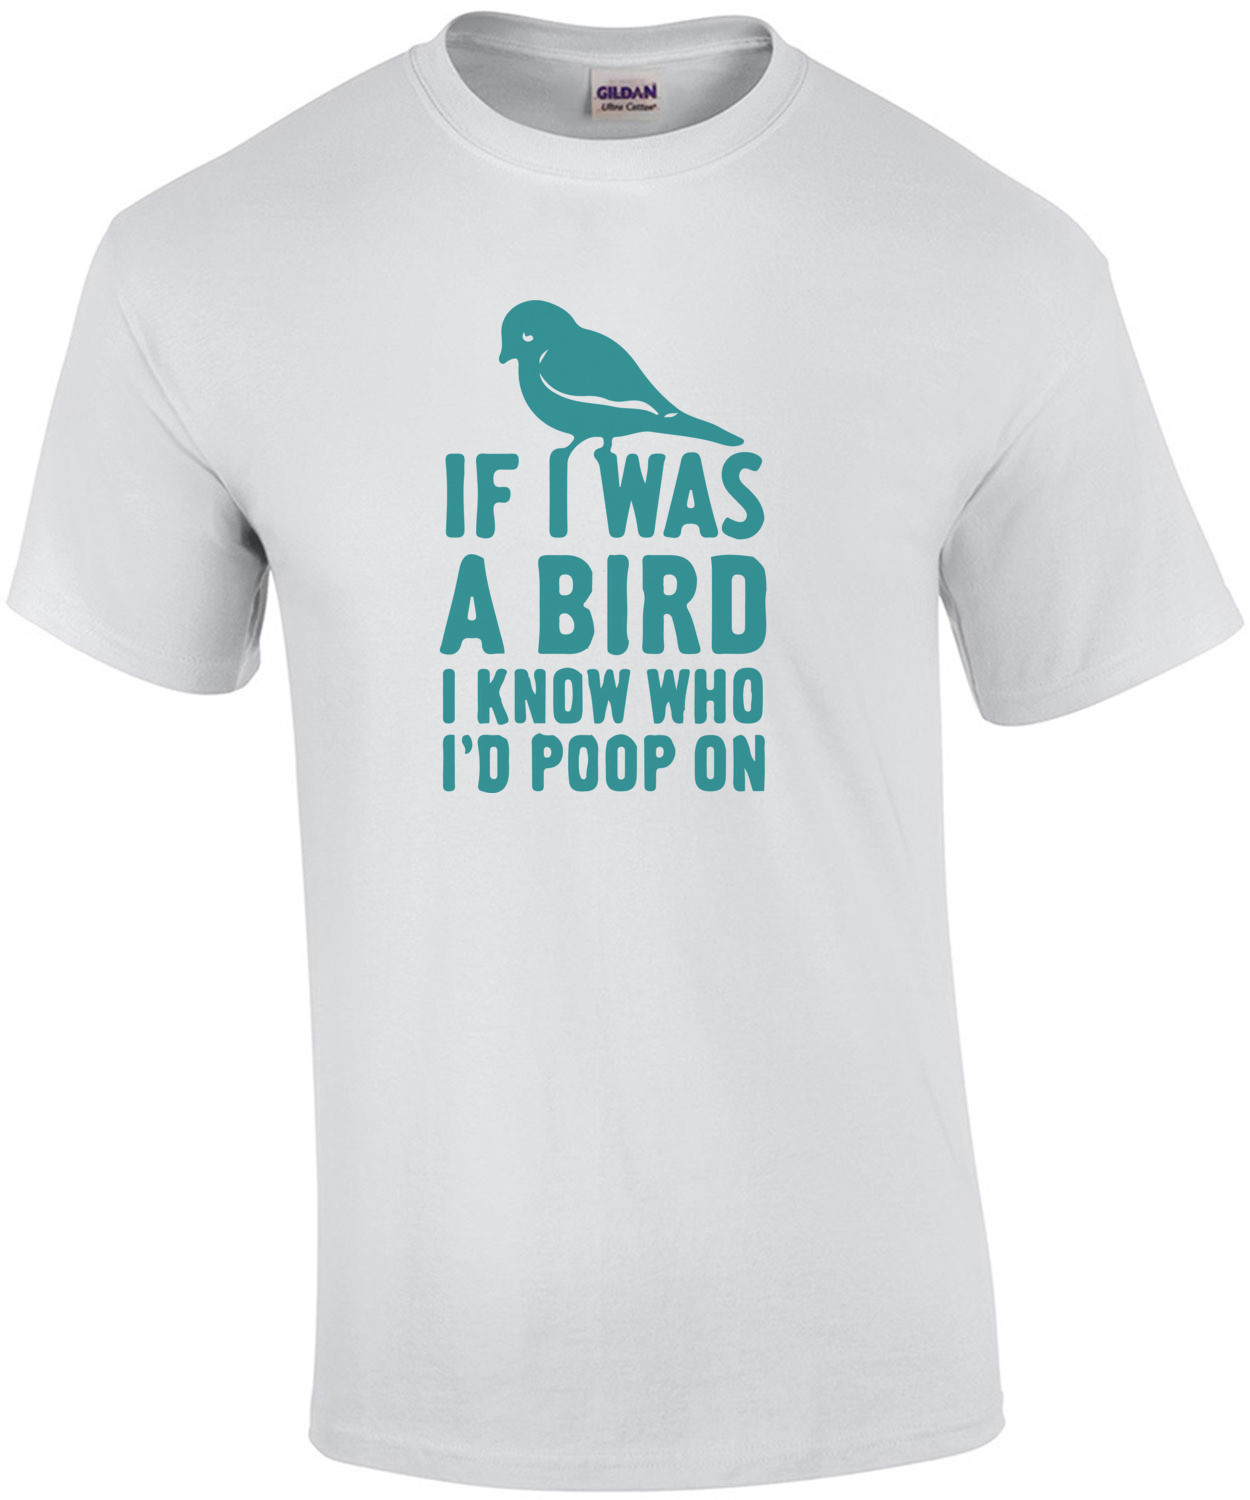 If I was a bird I know who I'd poop on